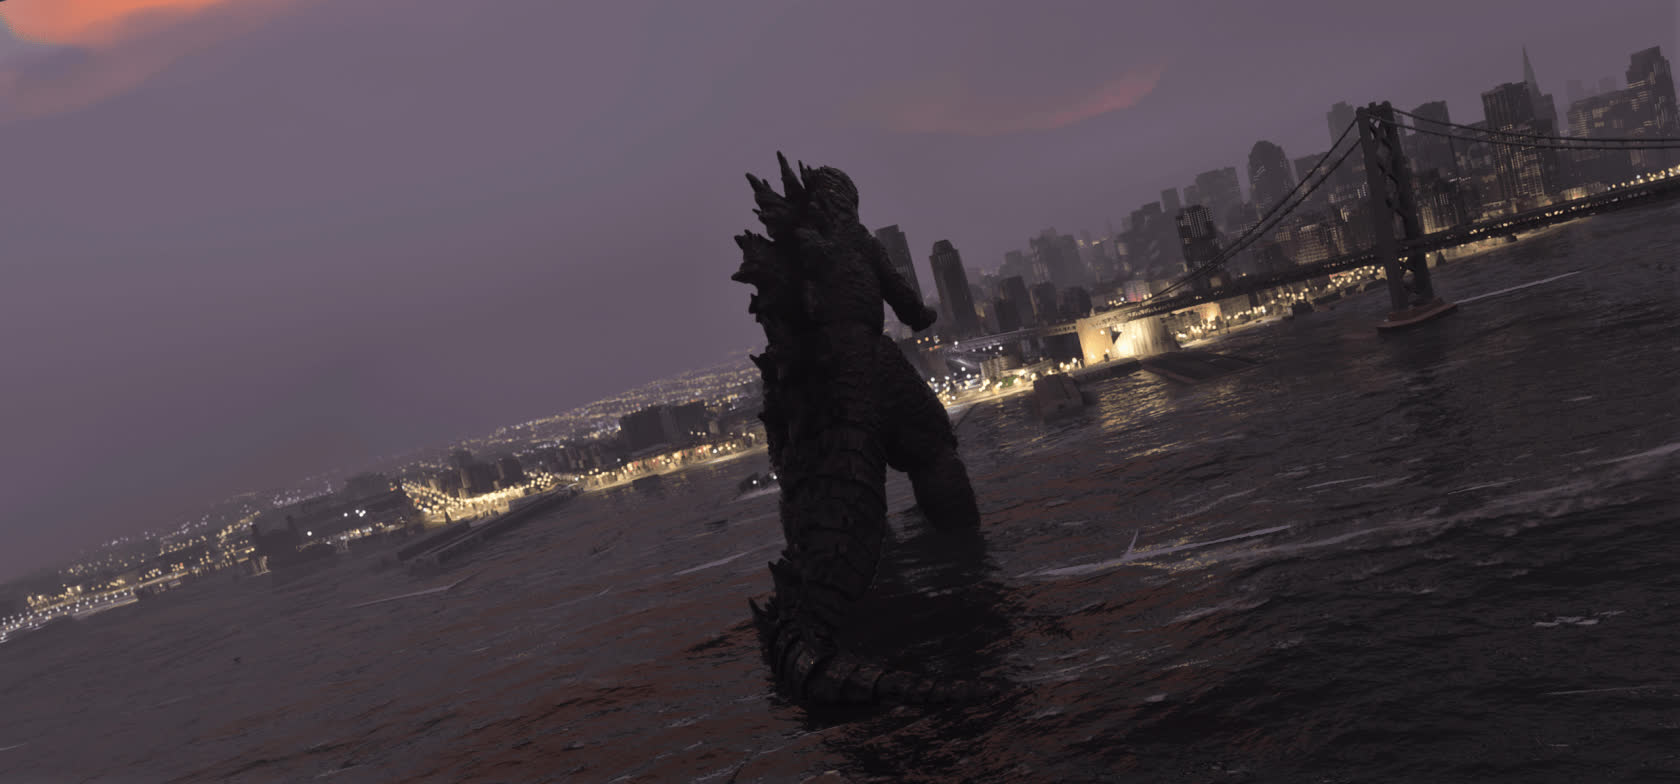 Godzilla has arrived in Flight Simulator 2020 courtesy of a player-made mod